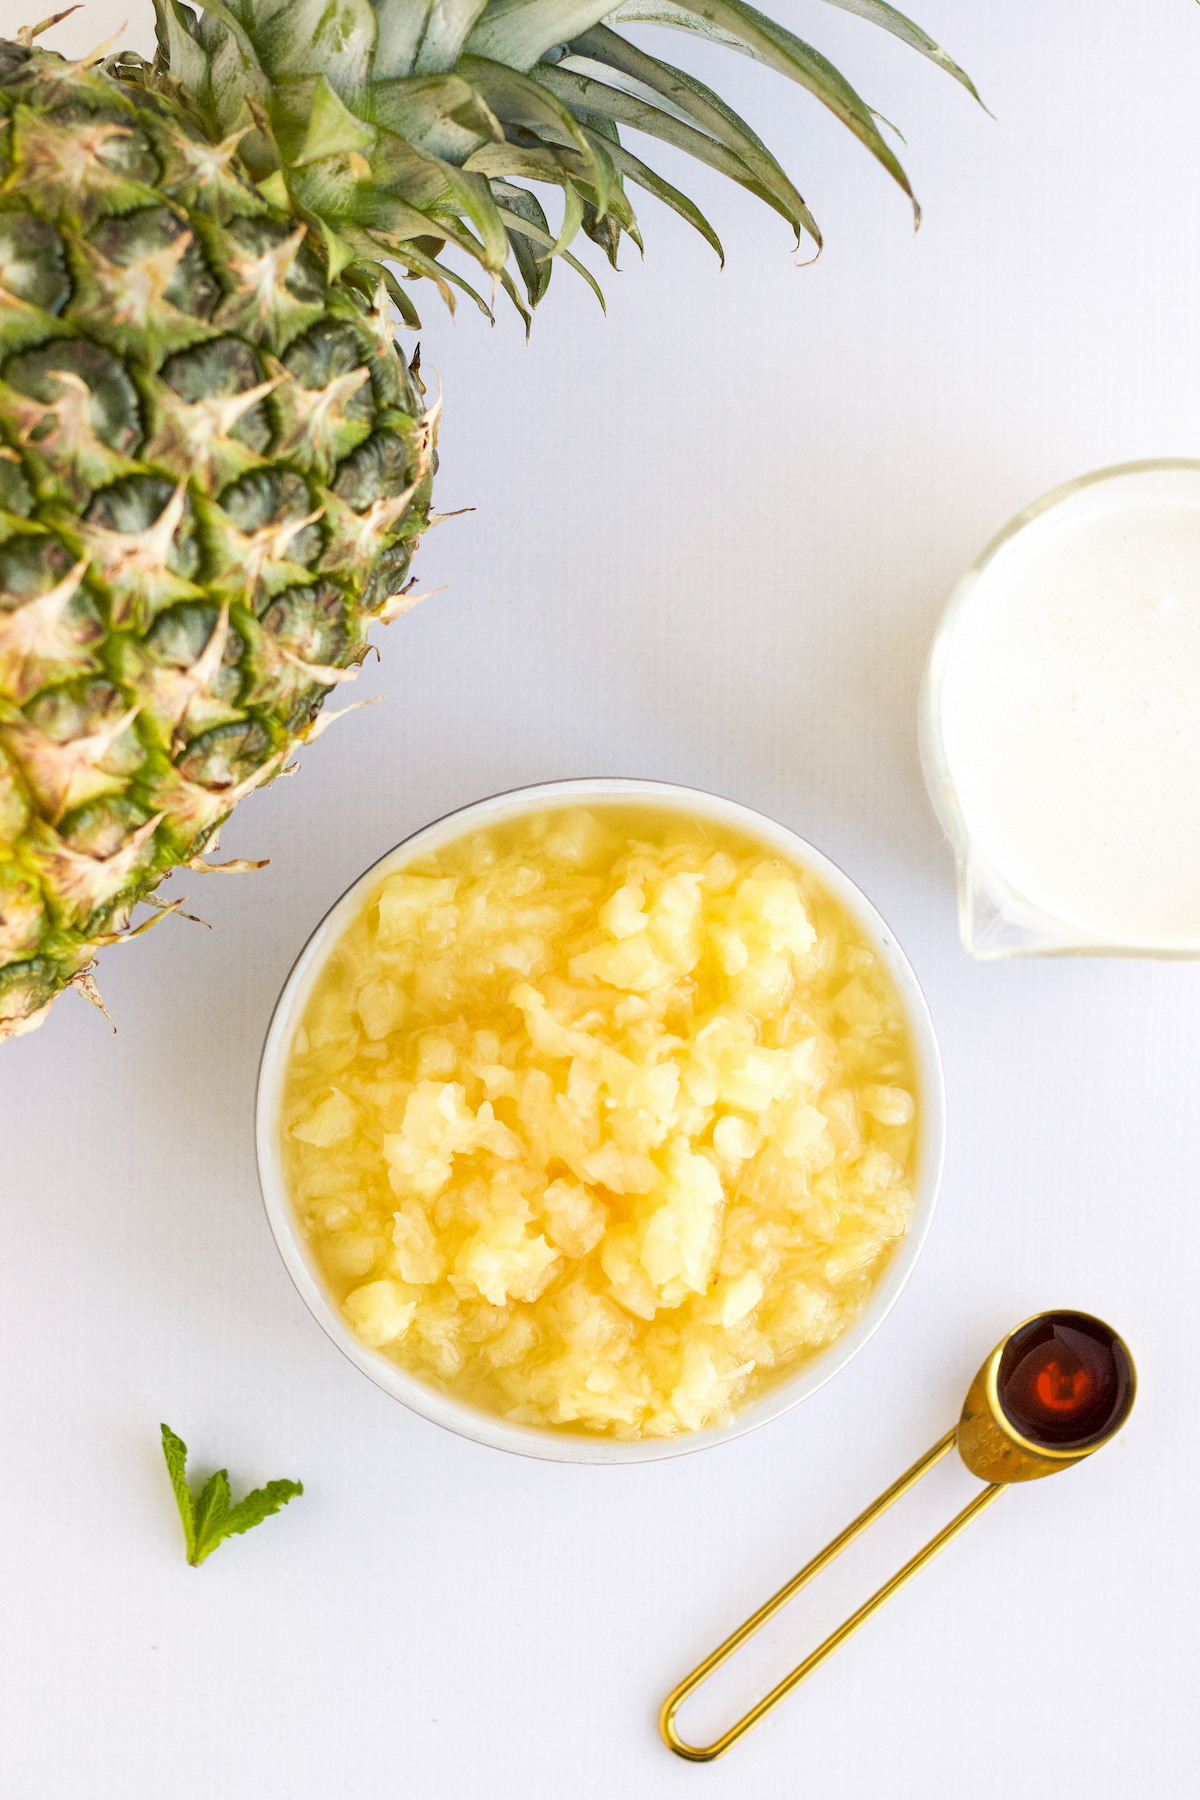 ingredients for dole whip popsicle with canned pineapple and vanilla